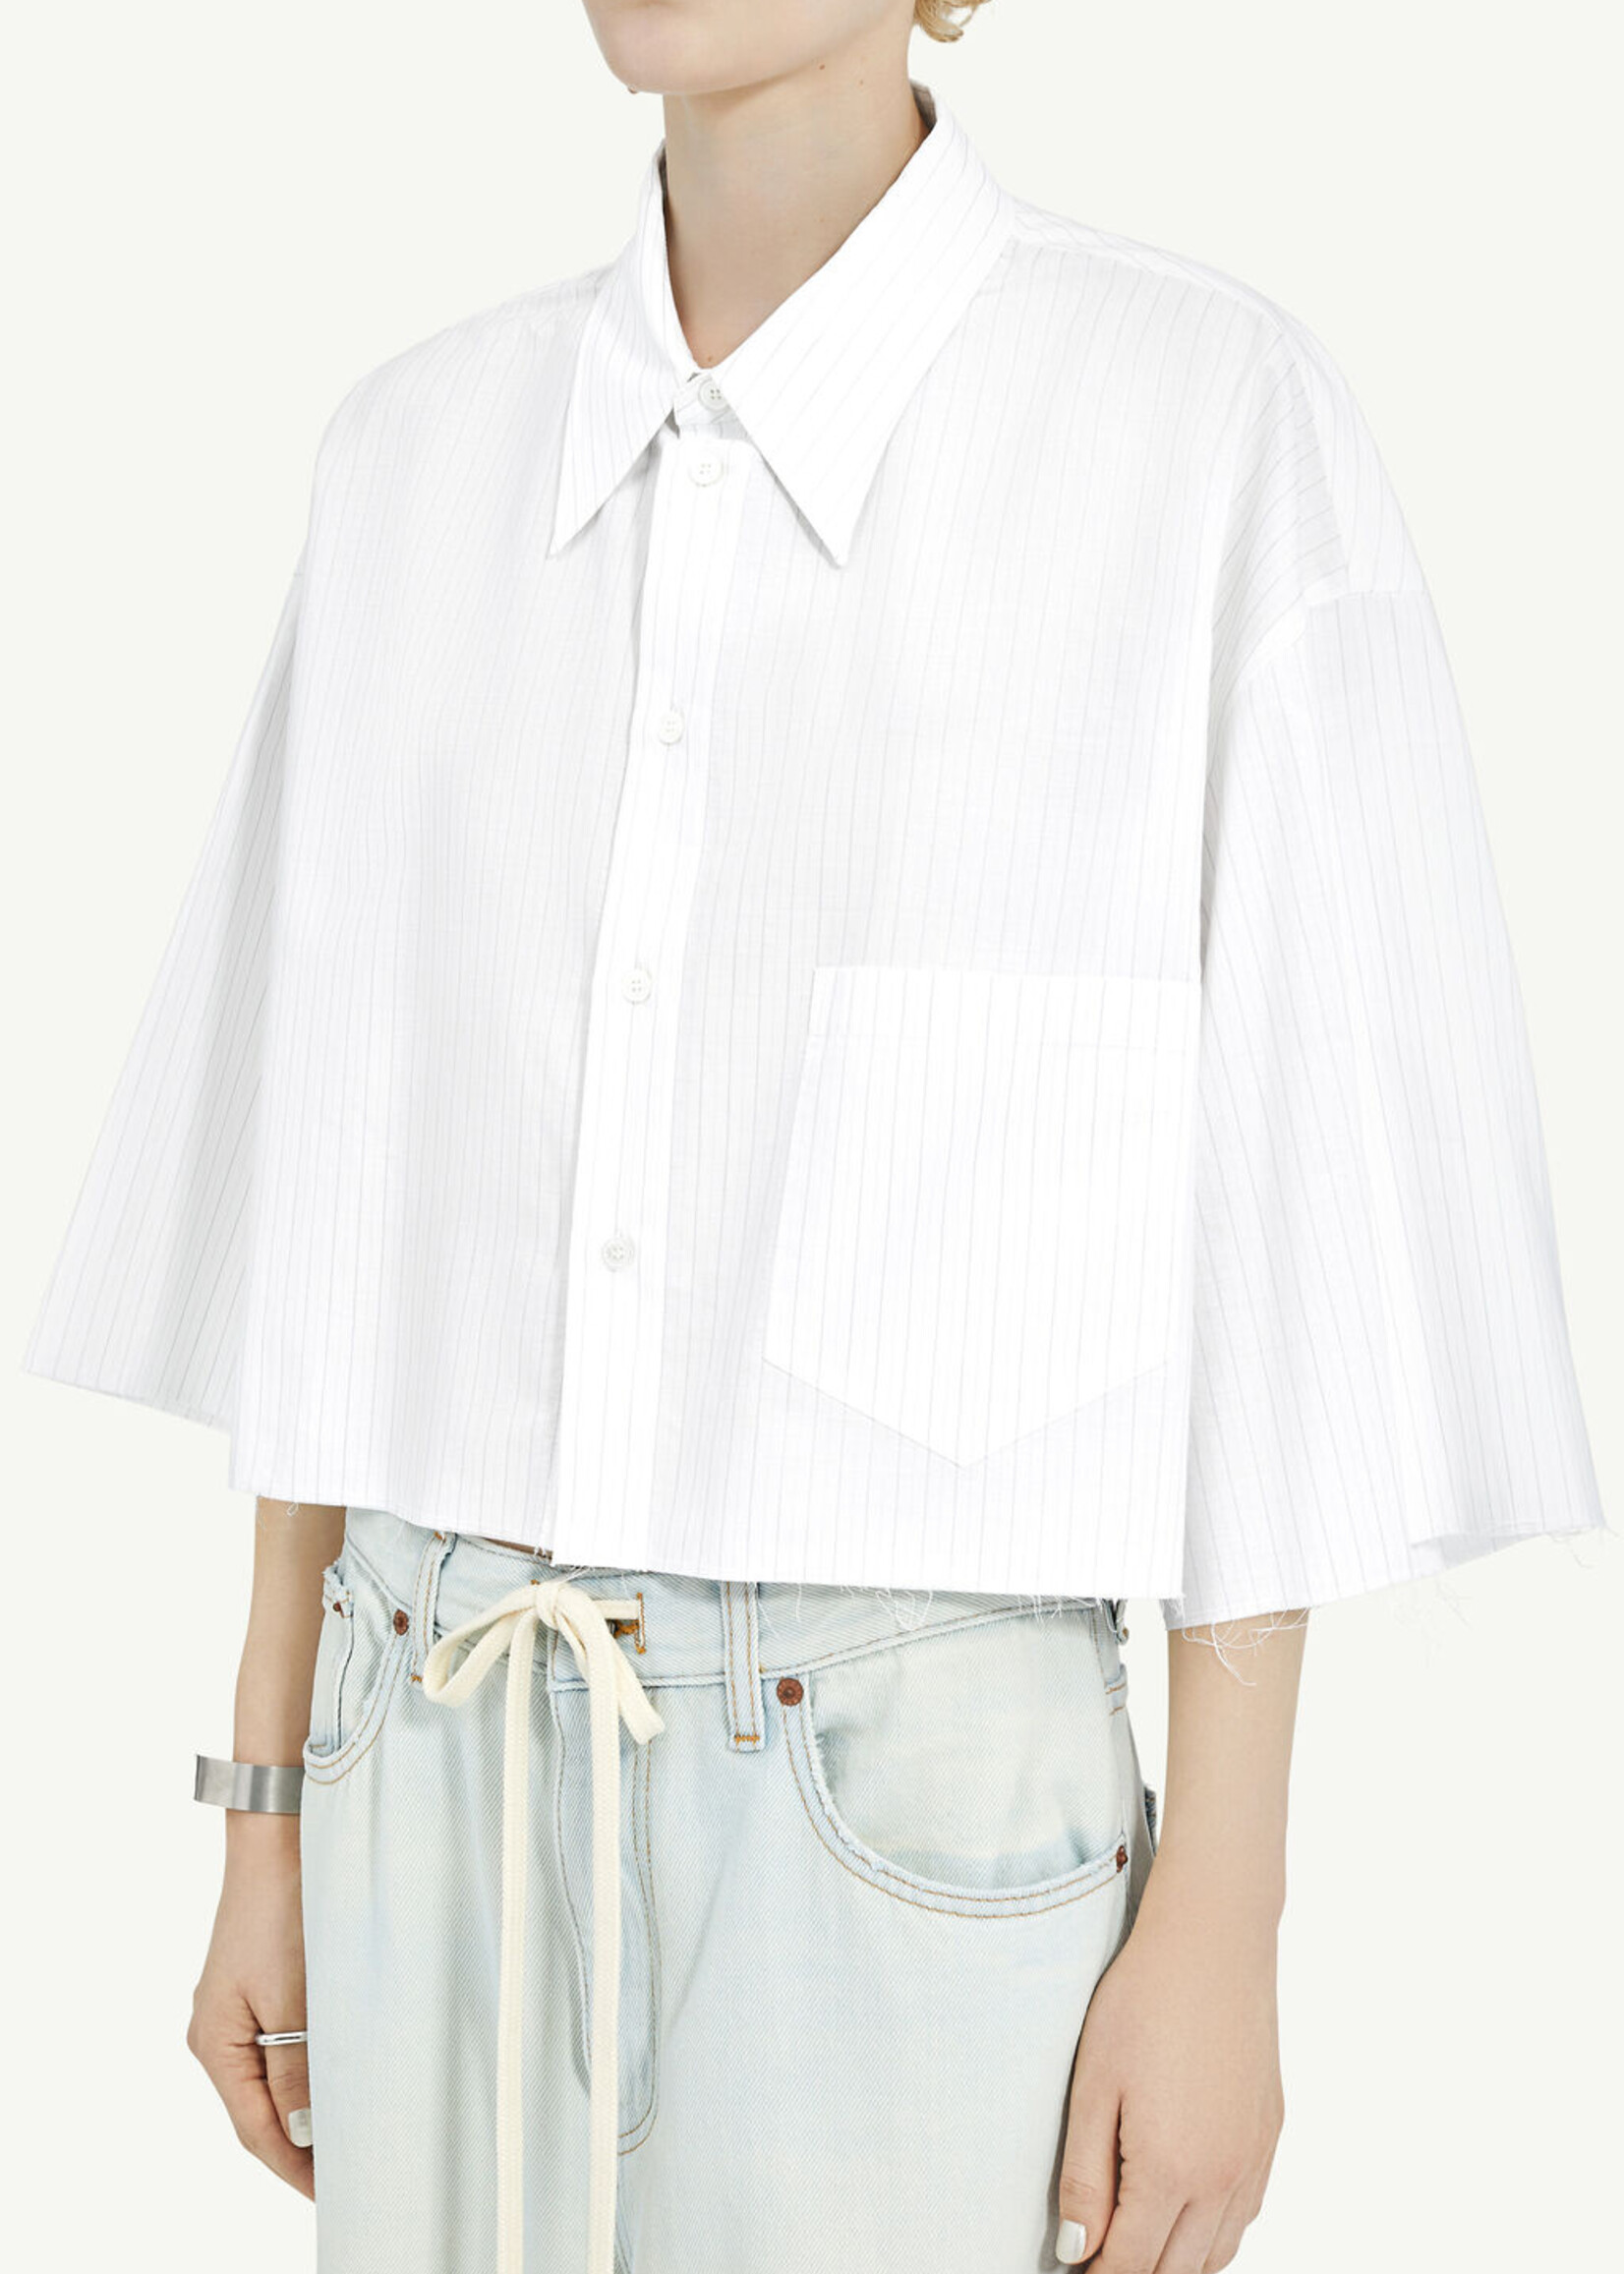 MM6 MAISON MARGIELA Short Sleeved Oversized Cropped Button Up in White Stripes